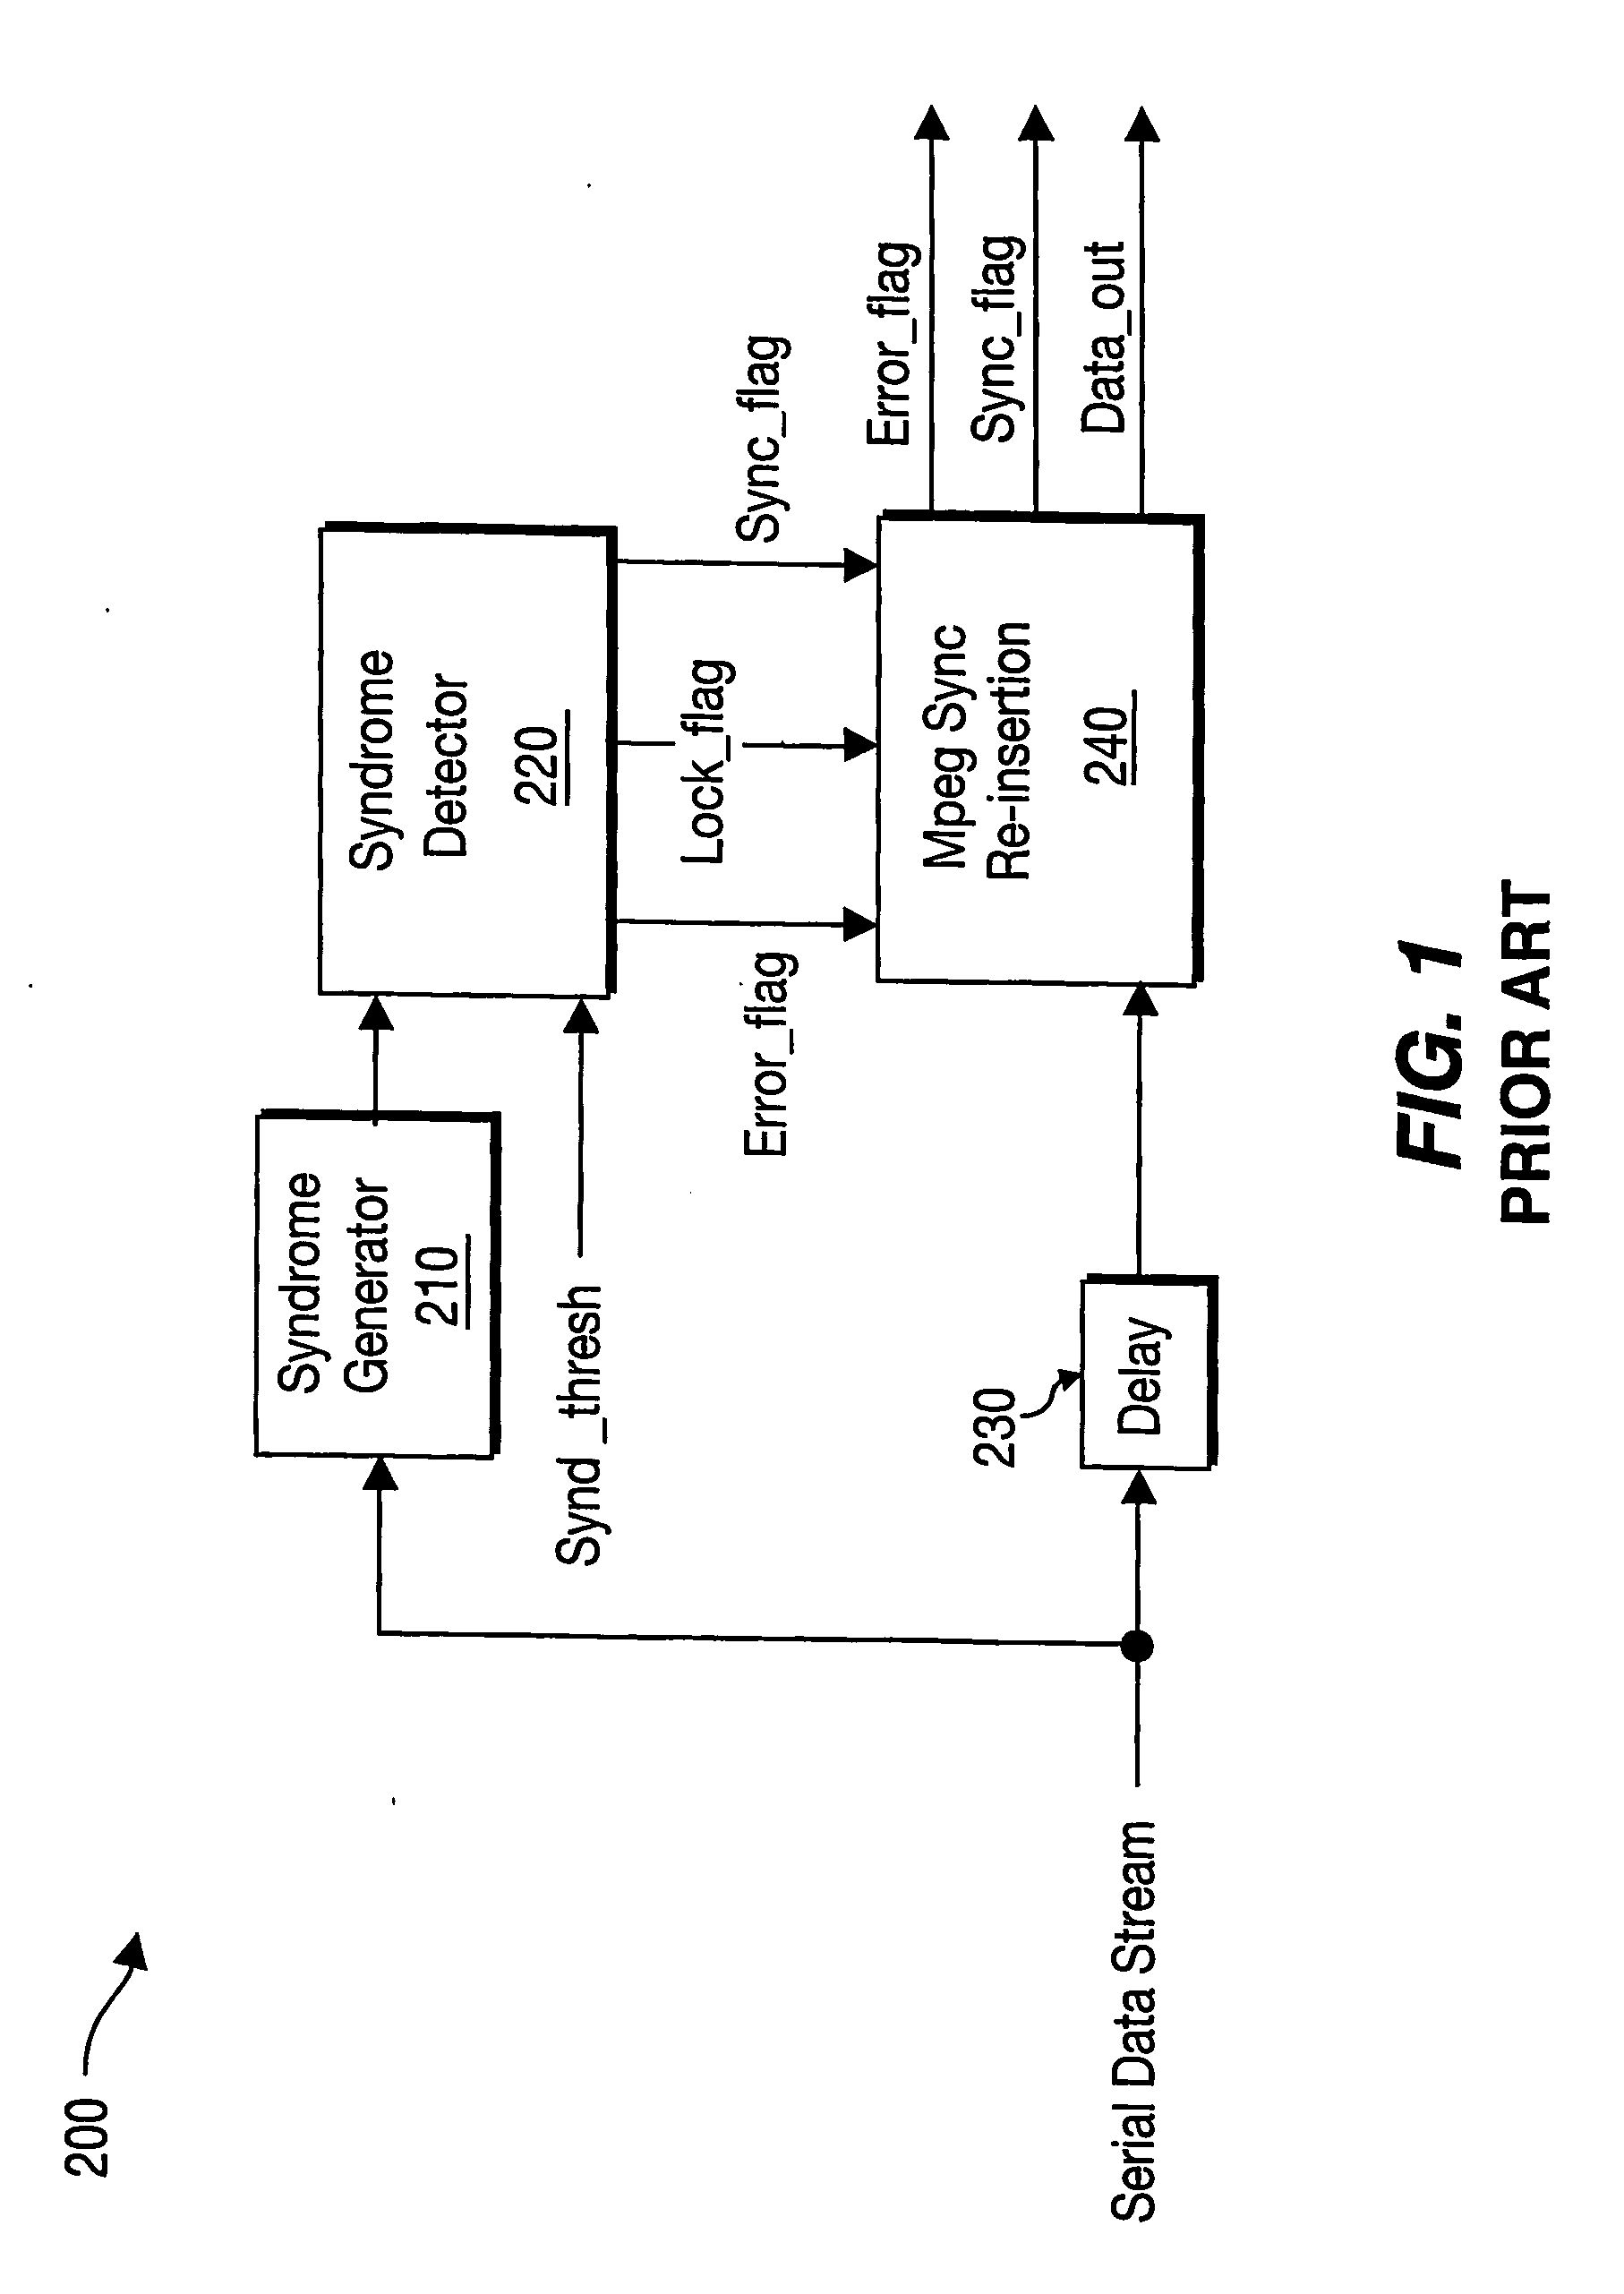 Method and Apparatus for False Sync Lock Detection in a Digital Media Receiver